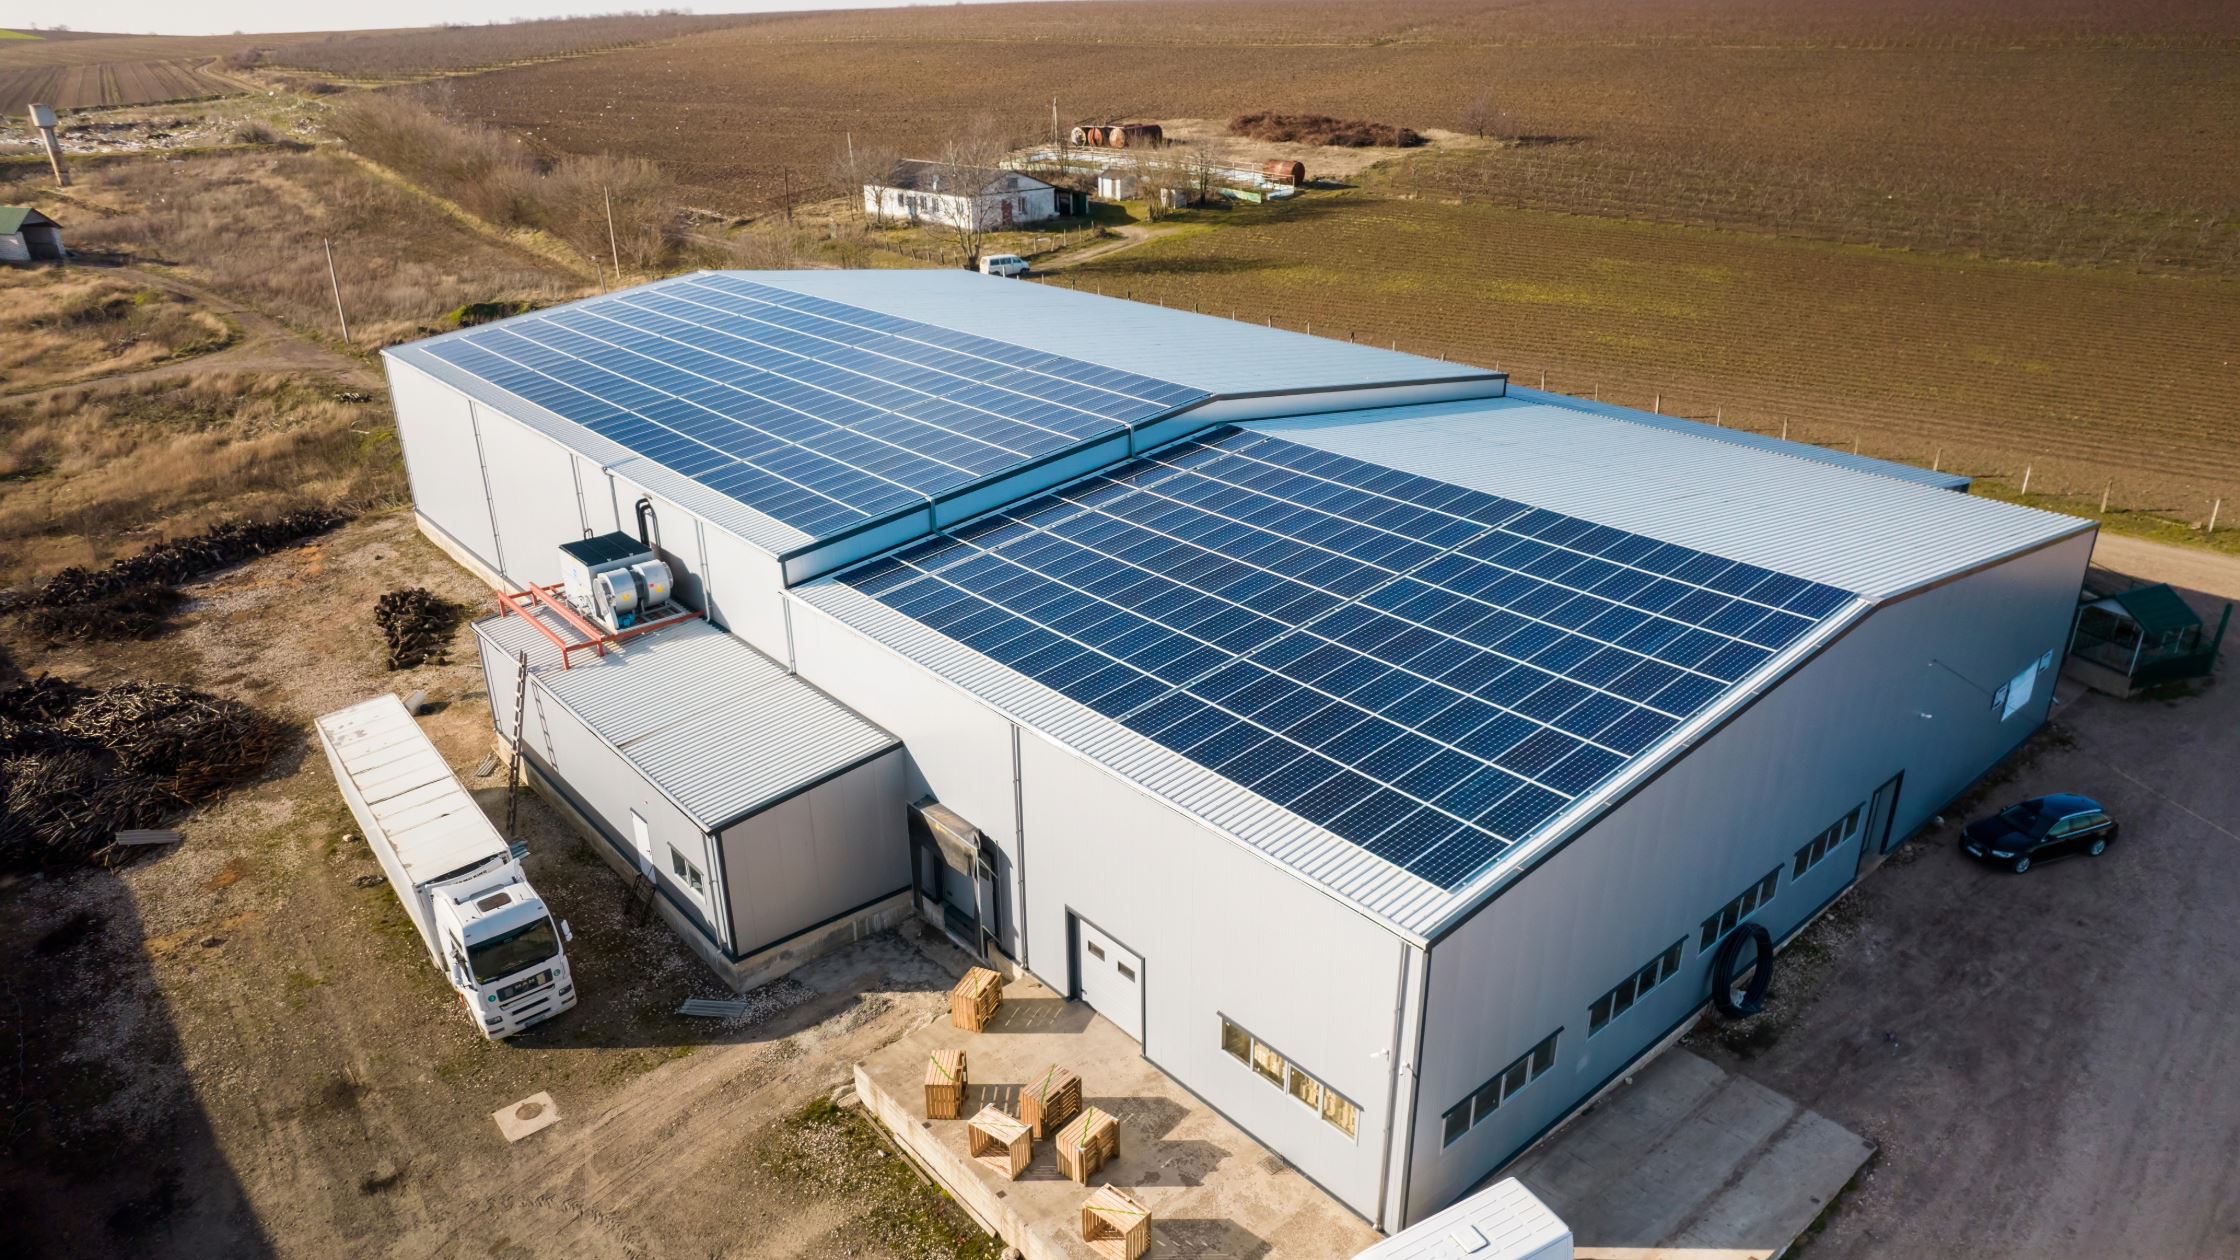 Ariel view of an agricultural warehouse with rooftop solar.